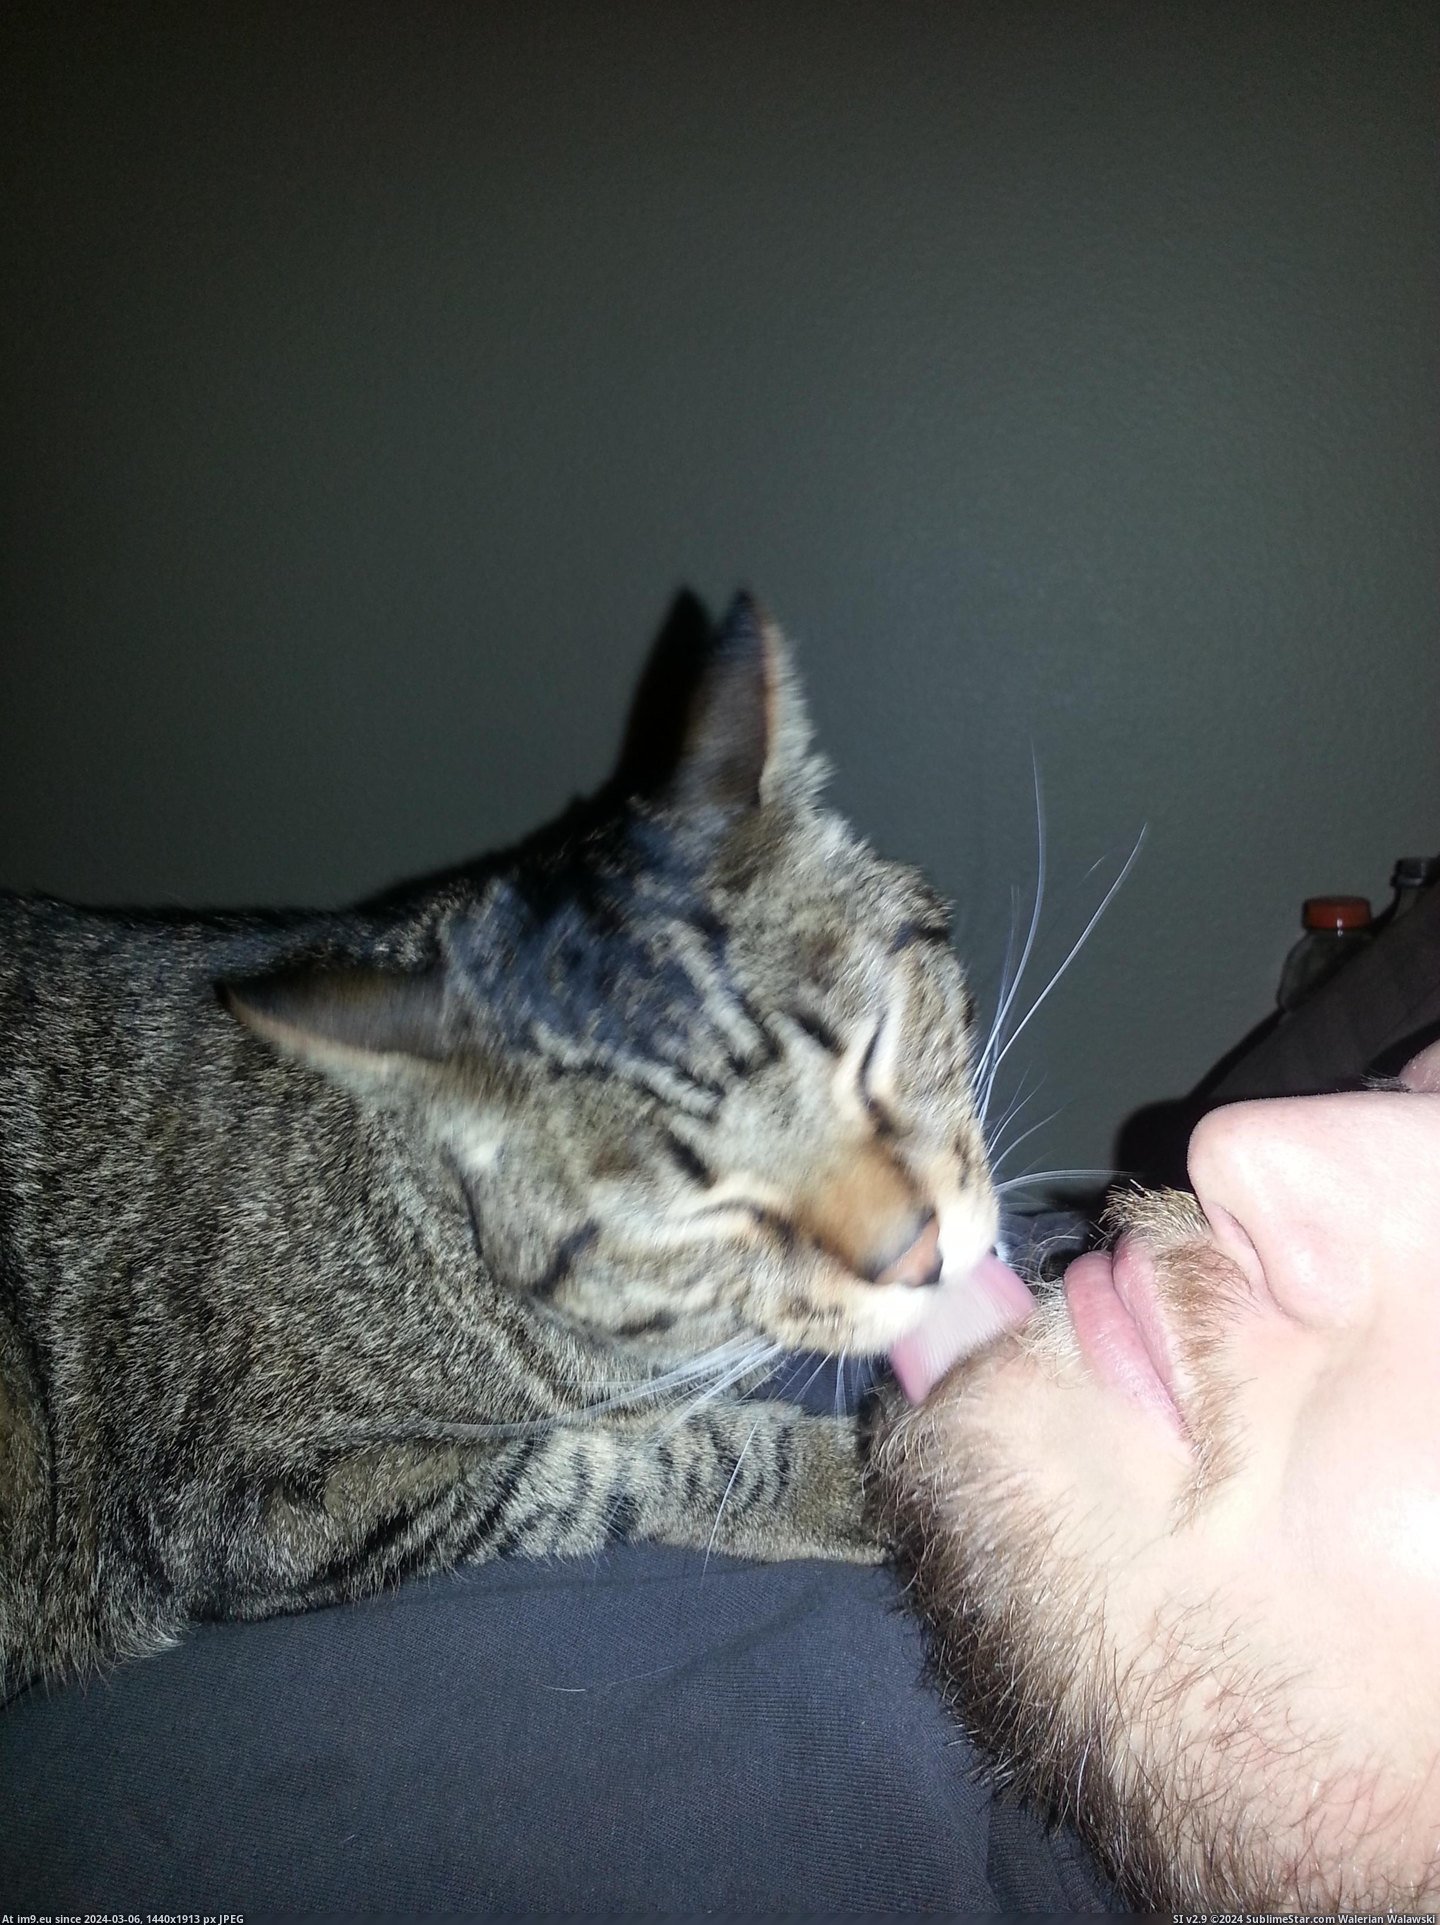 #Cats #Dirty #Beard #Nero #Bonding #Daddy #Lol [Cats] Daddy's beard is dirty! Nero and my bf, bonding. Lol. Pic. (Image of album My r/CATS favs))